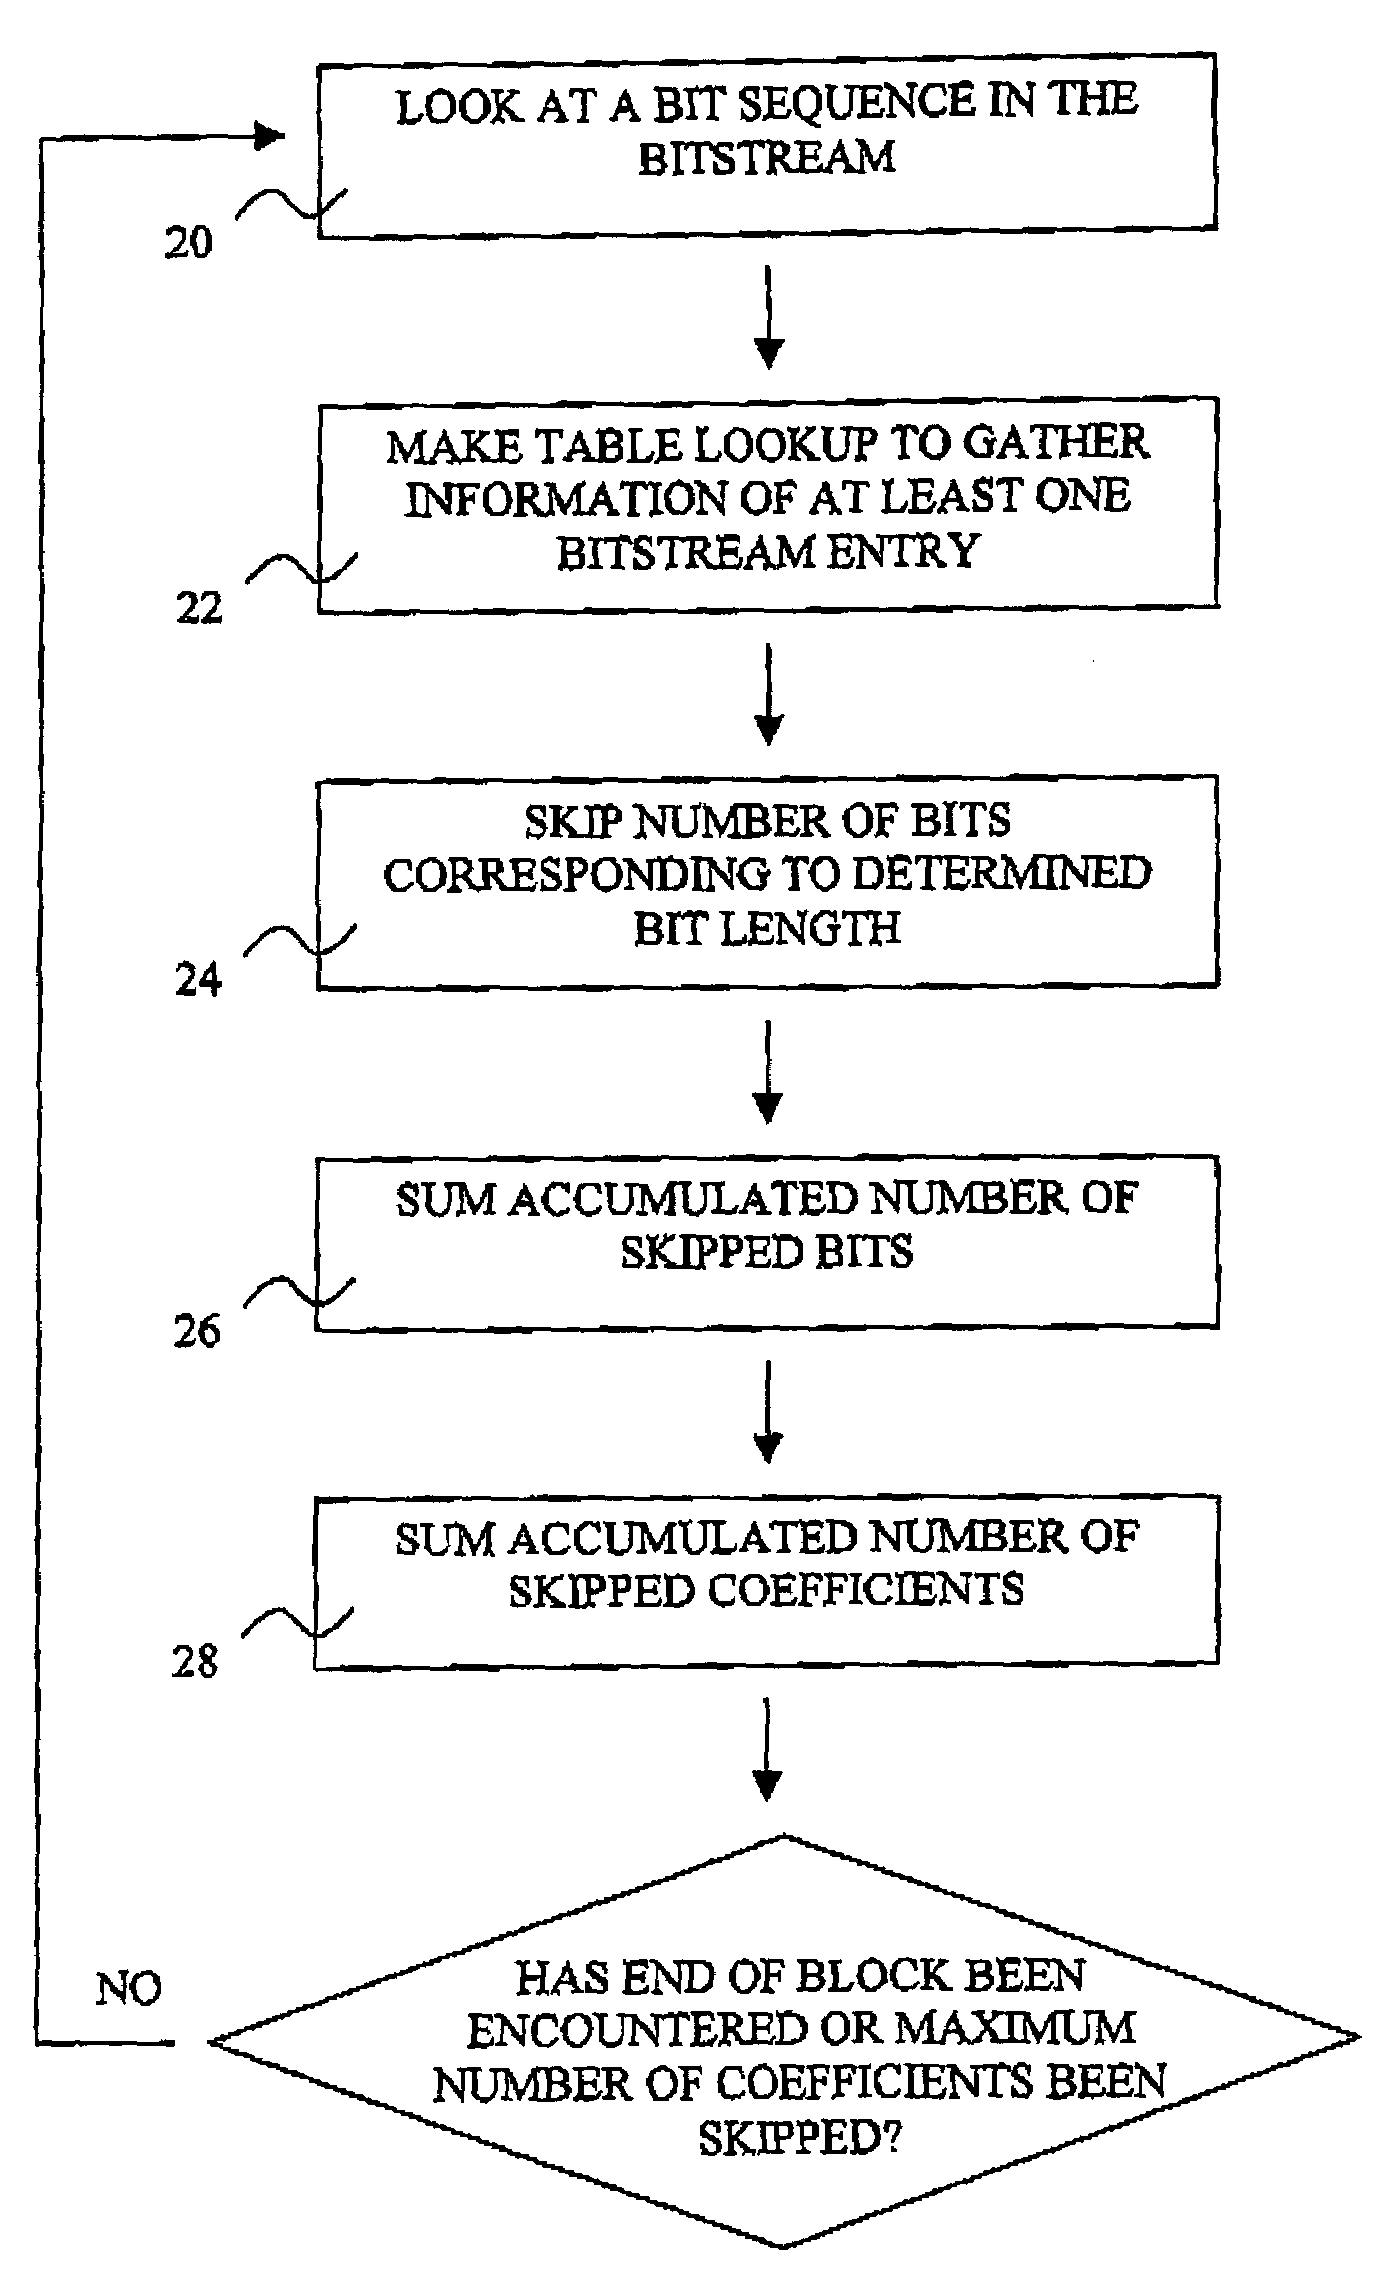 Method for processing a digital image and image representation format